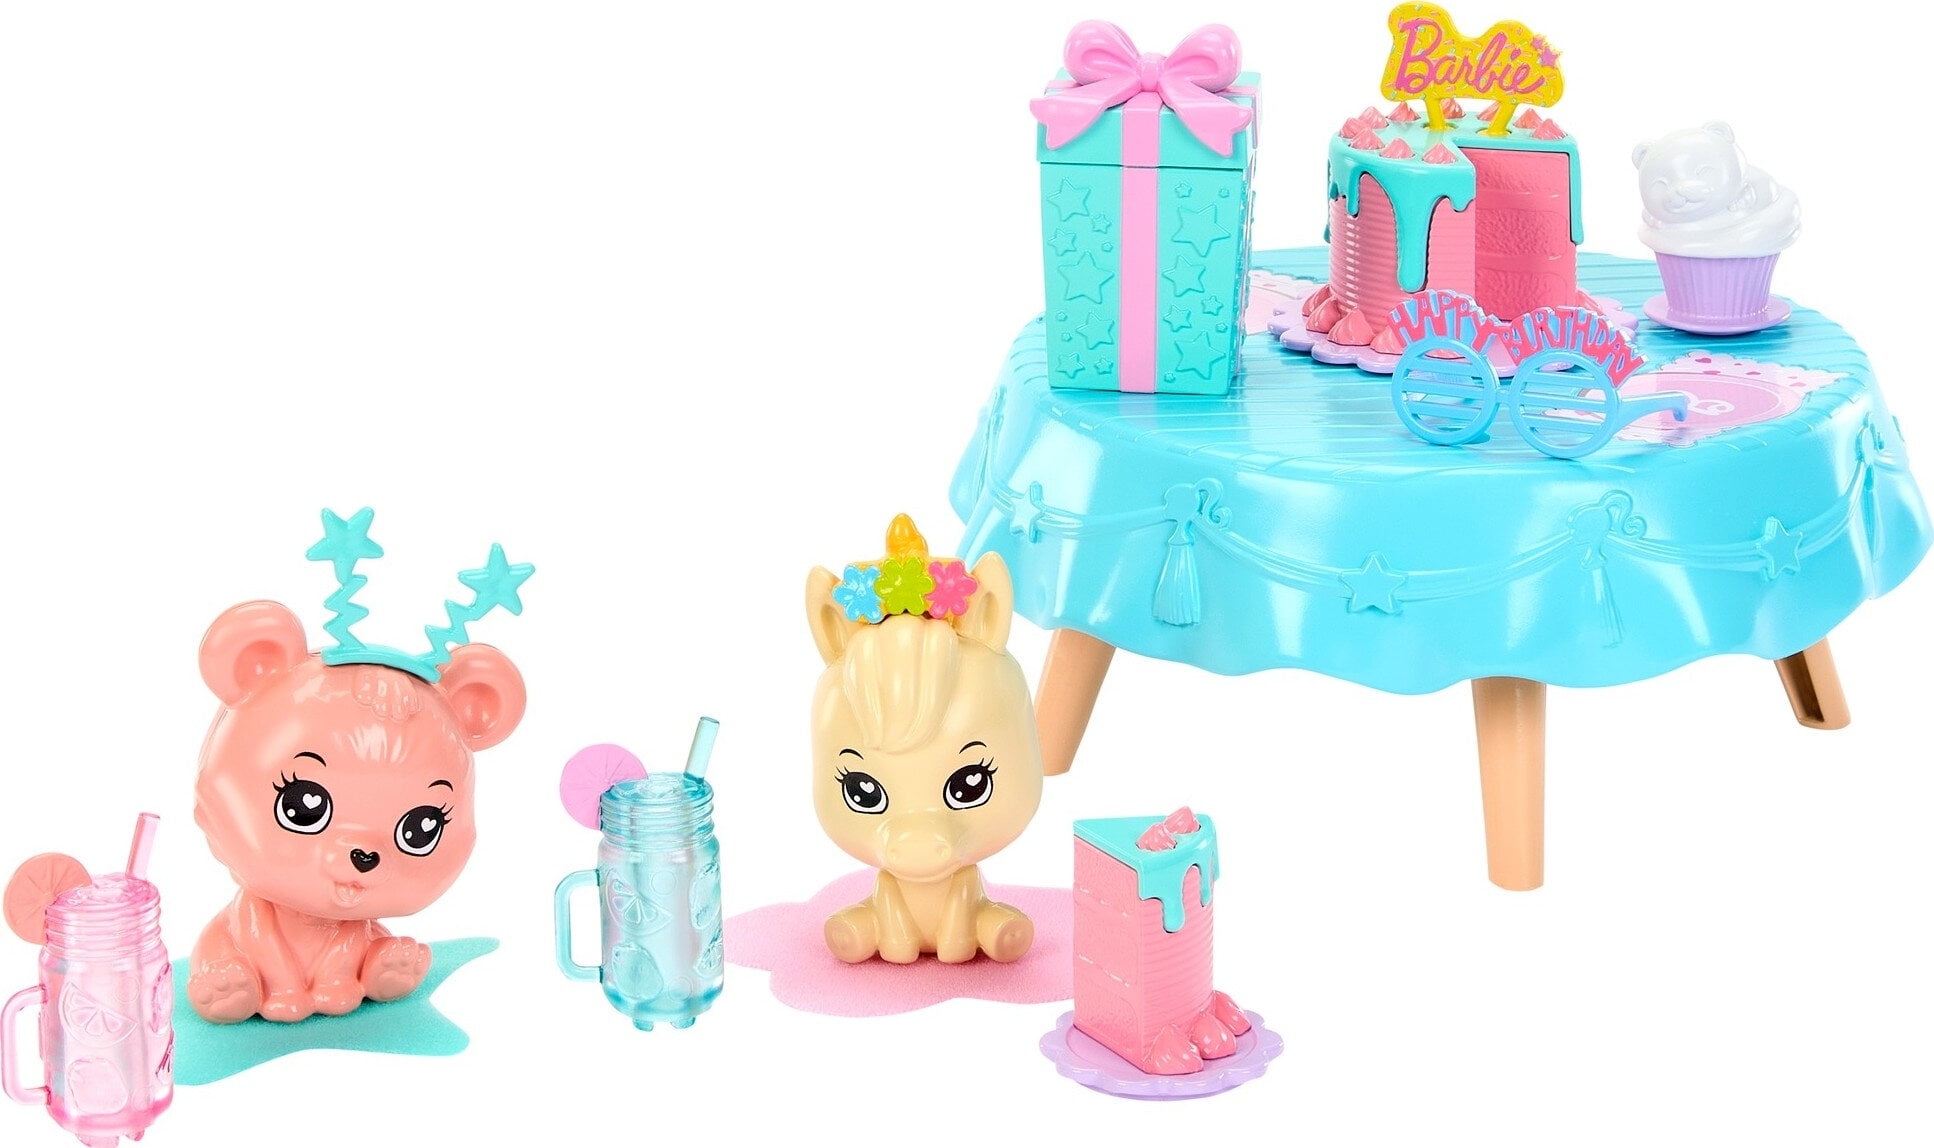 My First Barbie Birthday Accessories for Preschool Dolls, Accessory Pack with Pet Unicorn And Bear